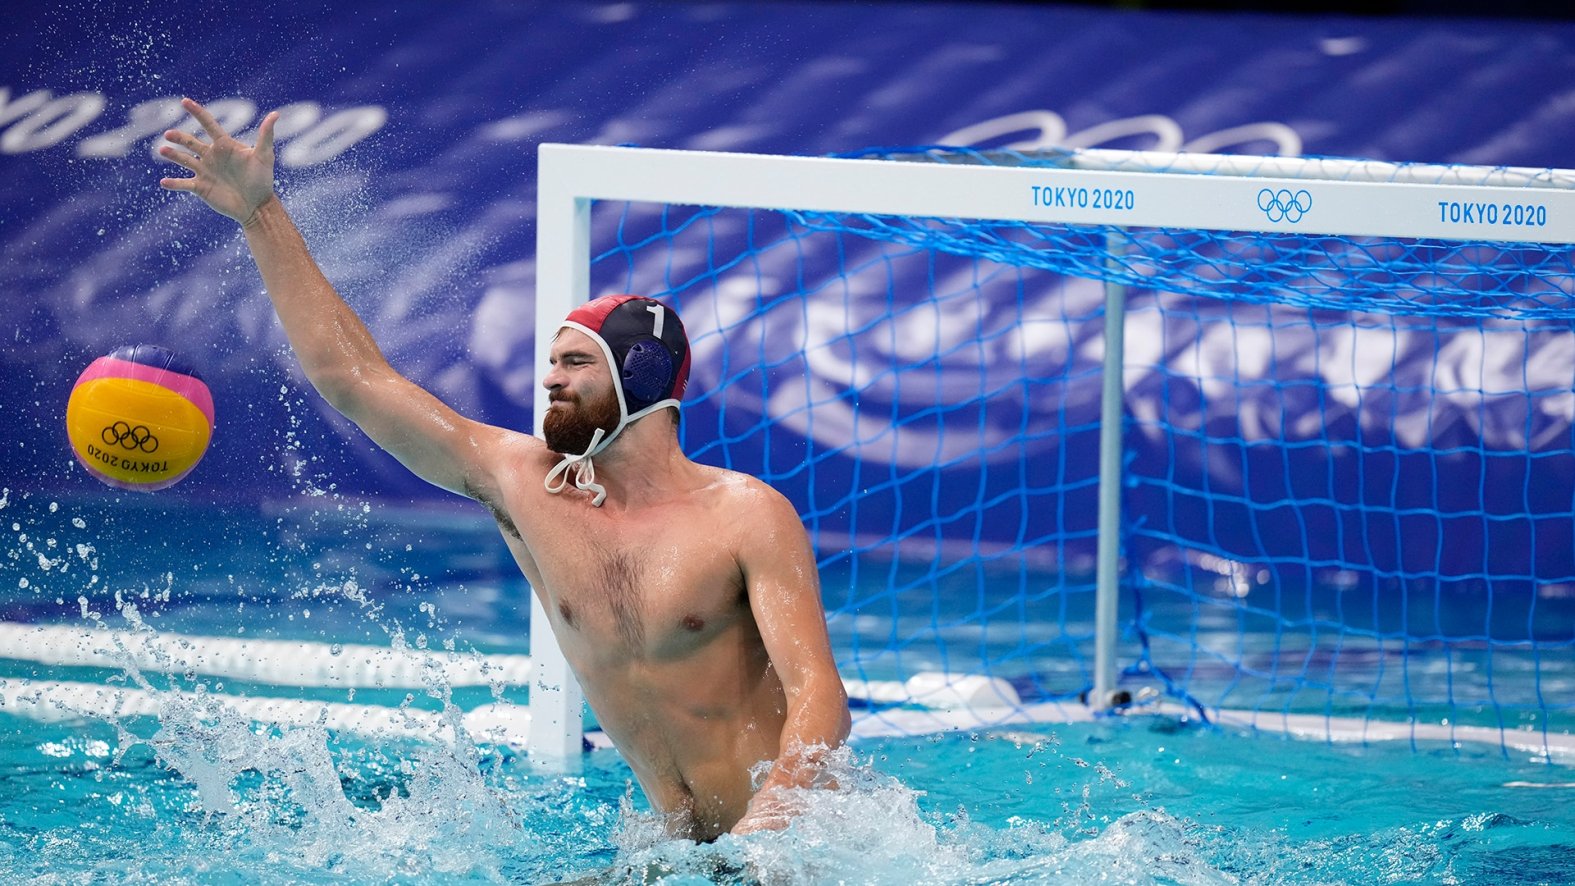 U.S. Men’s Water Polo Dismantles South Africa for 203 Victory NBC10